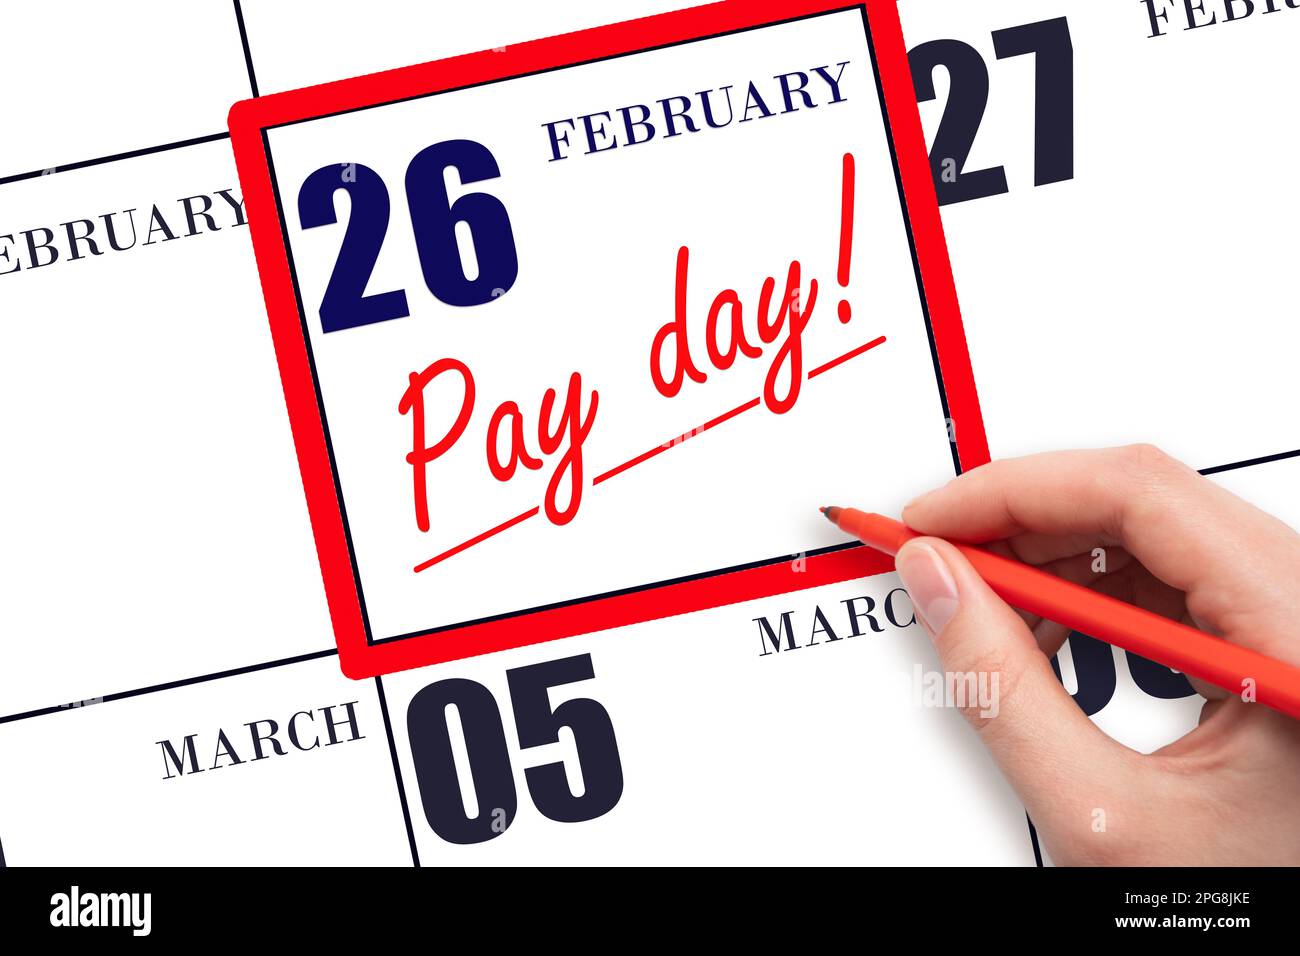 26th day of February. Hand writing text PAY DATE on calendar date February 26 and underline it. Payment due date. Reminder concept of payment. Winter Stock Photo